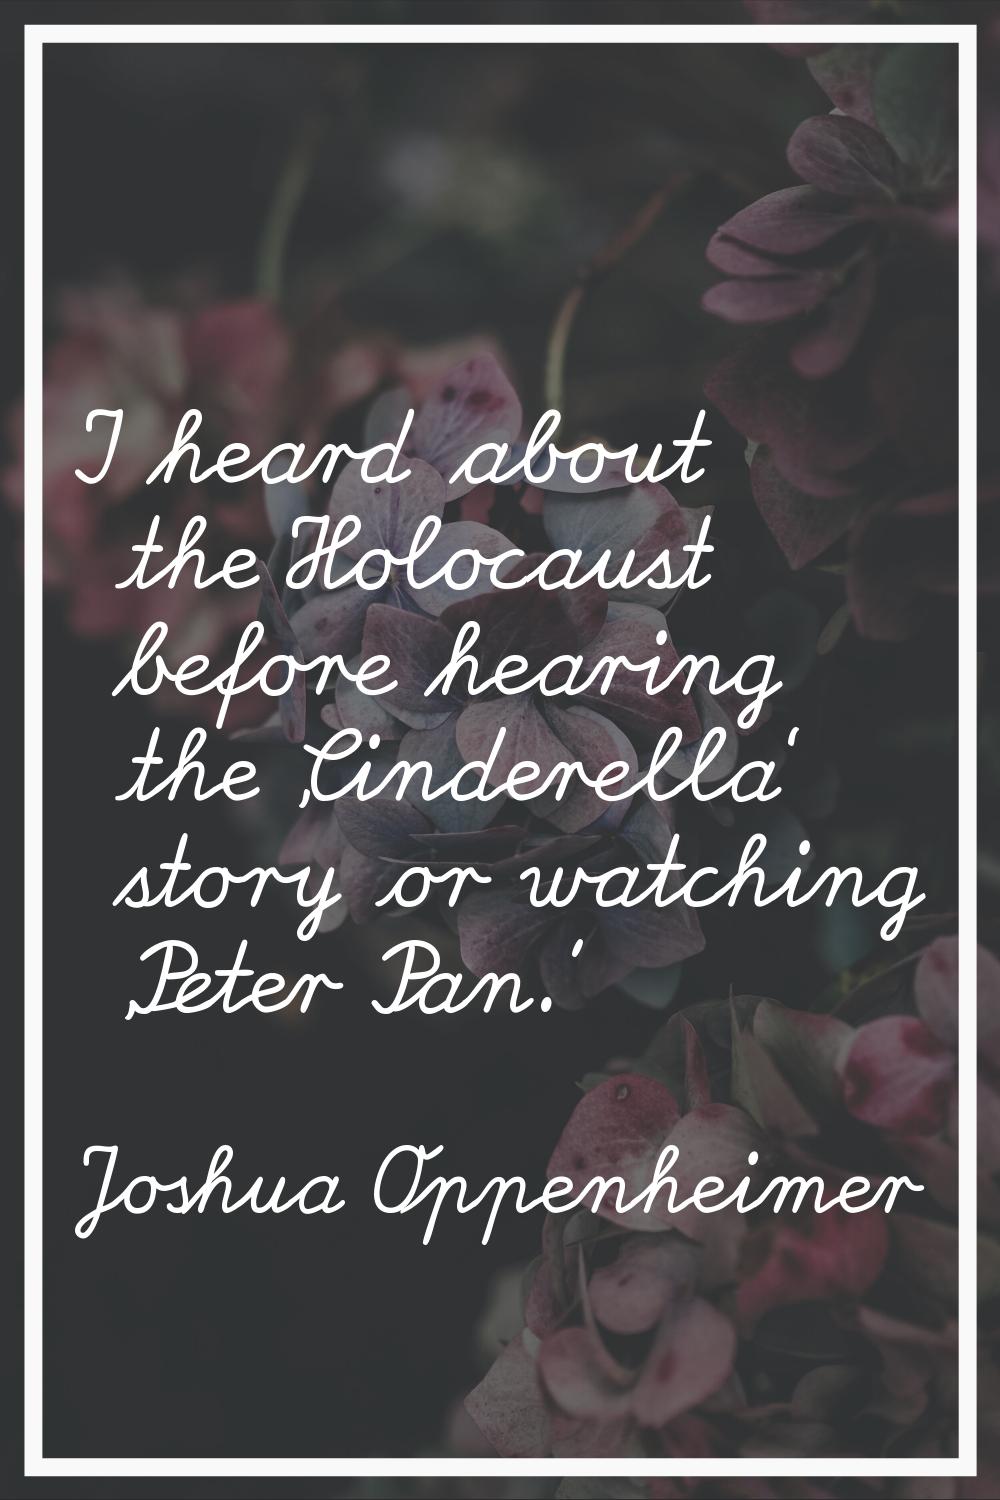 I heard about the Holocaust before hearing the 'Cinderella' story or watching 'Peter Pan.'